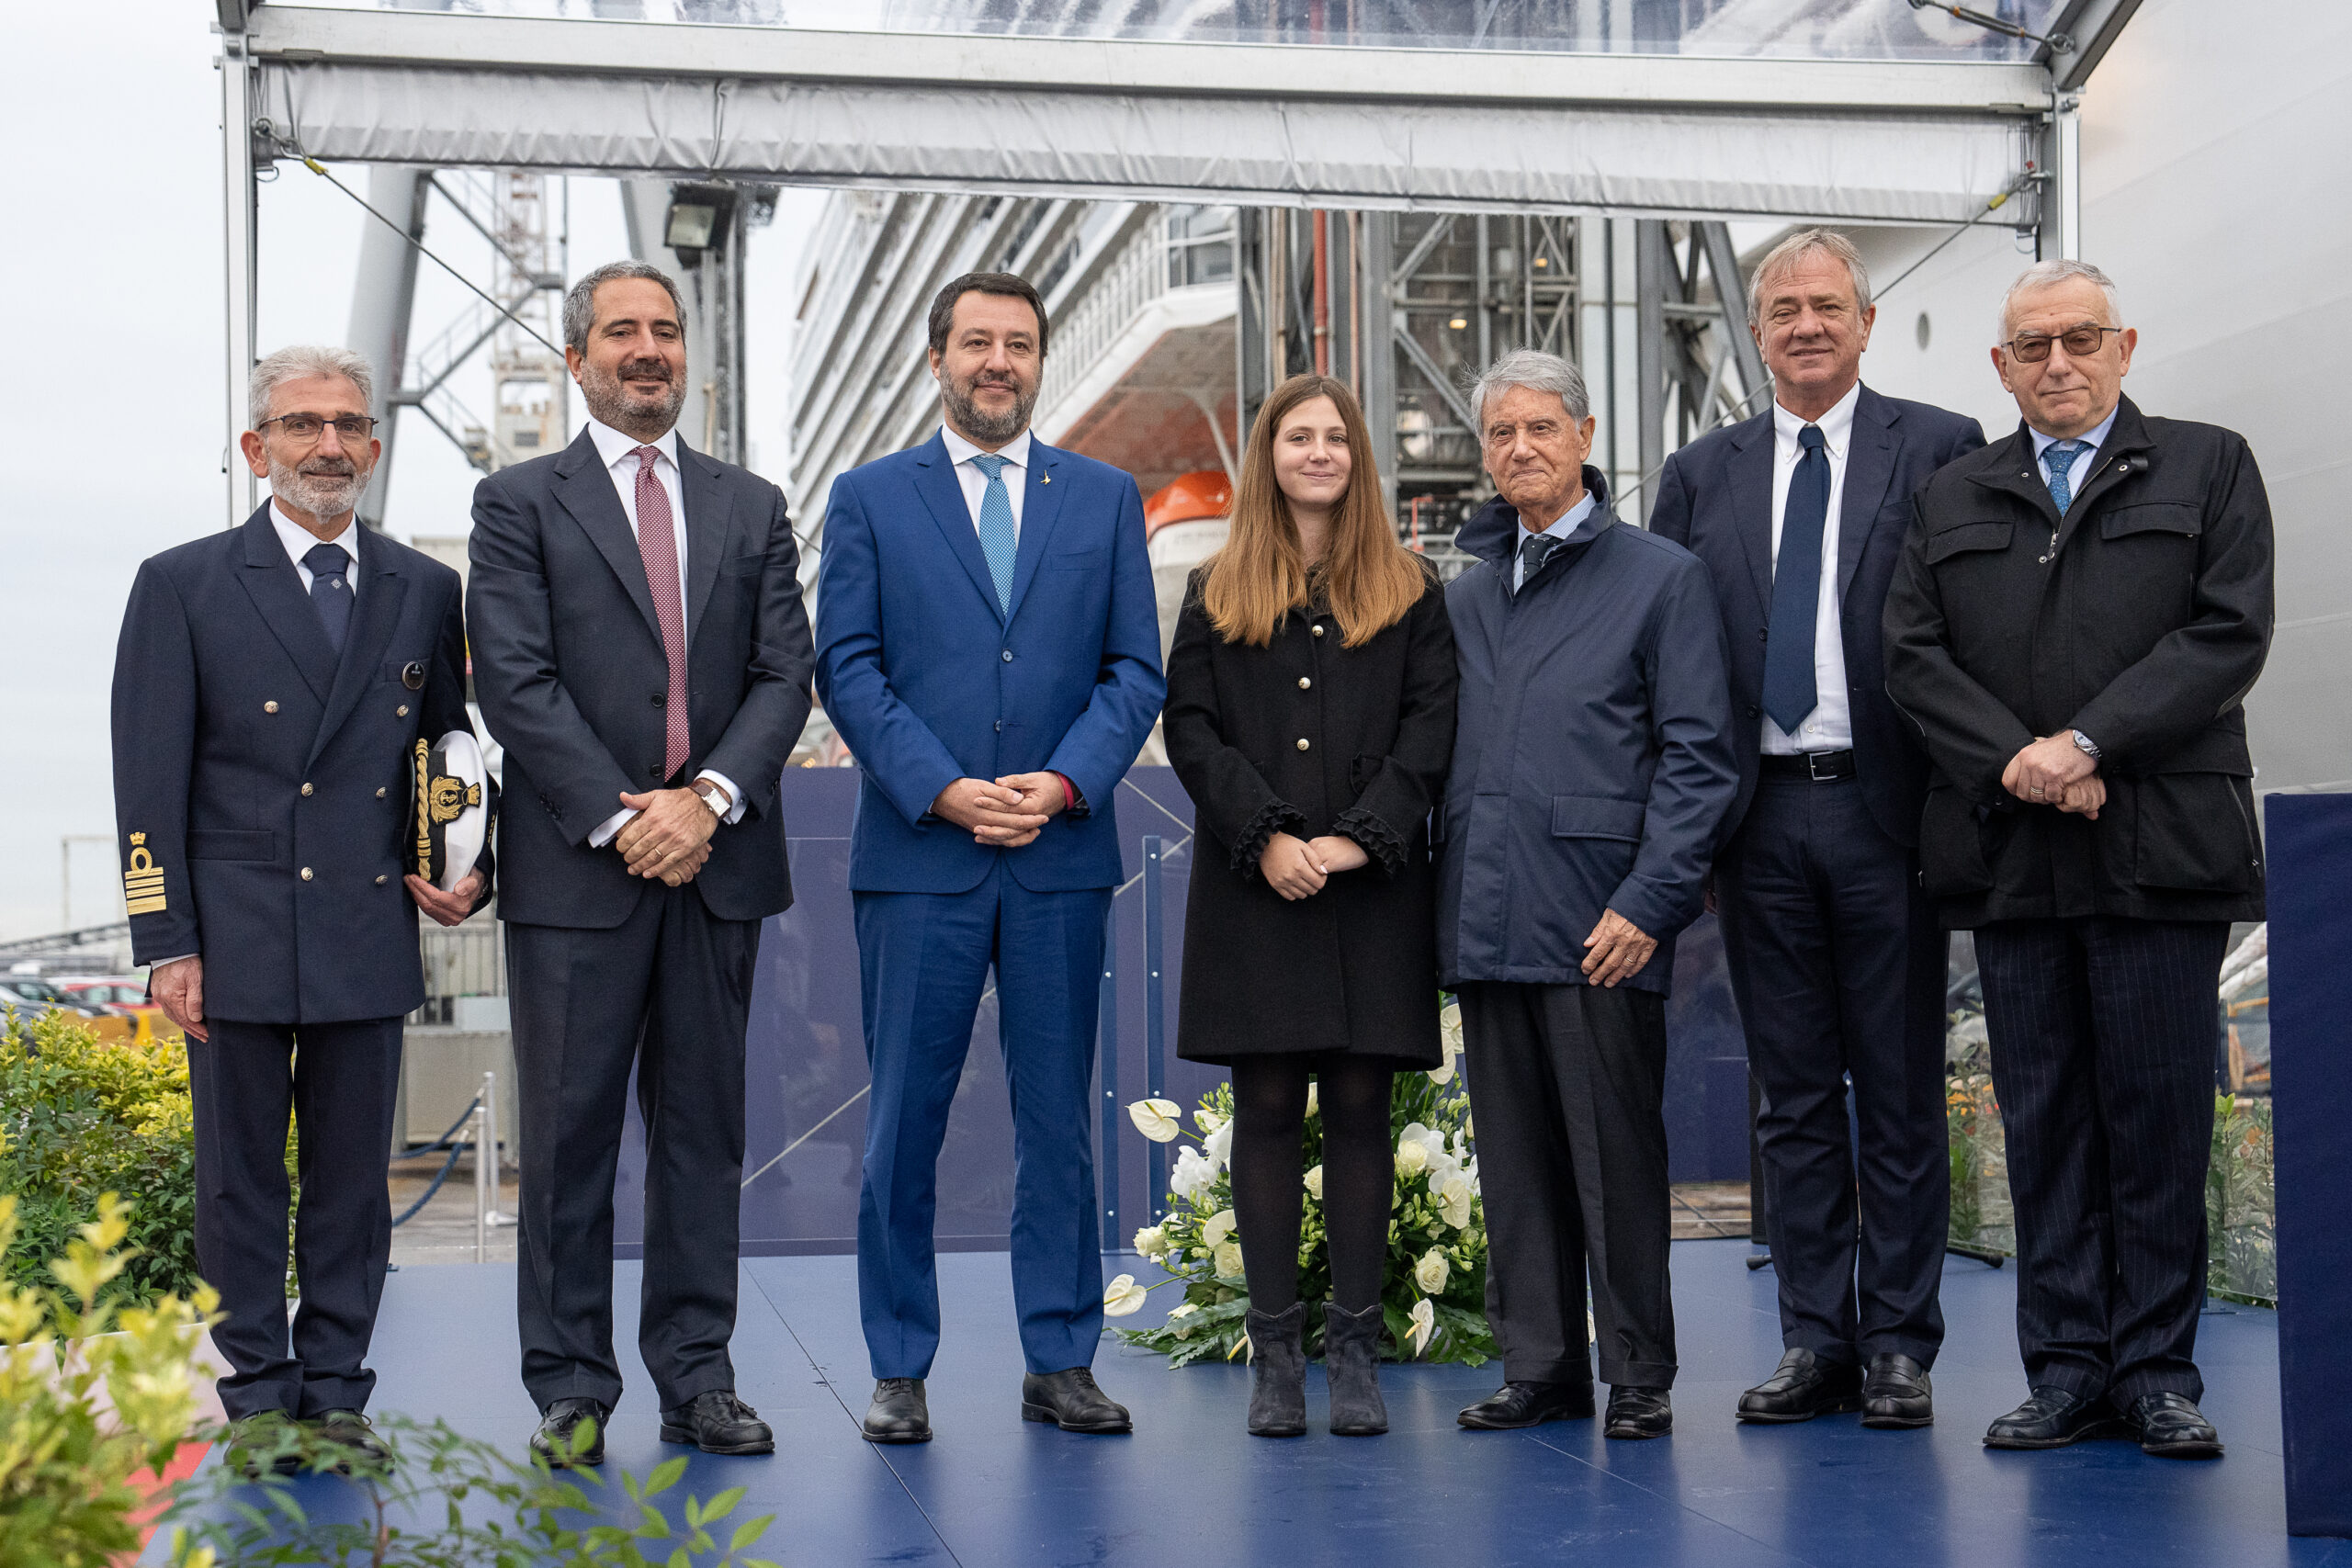 Pierfrancesco Vago speaks at the delivery of MSC Seascape